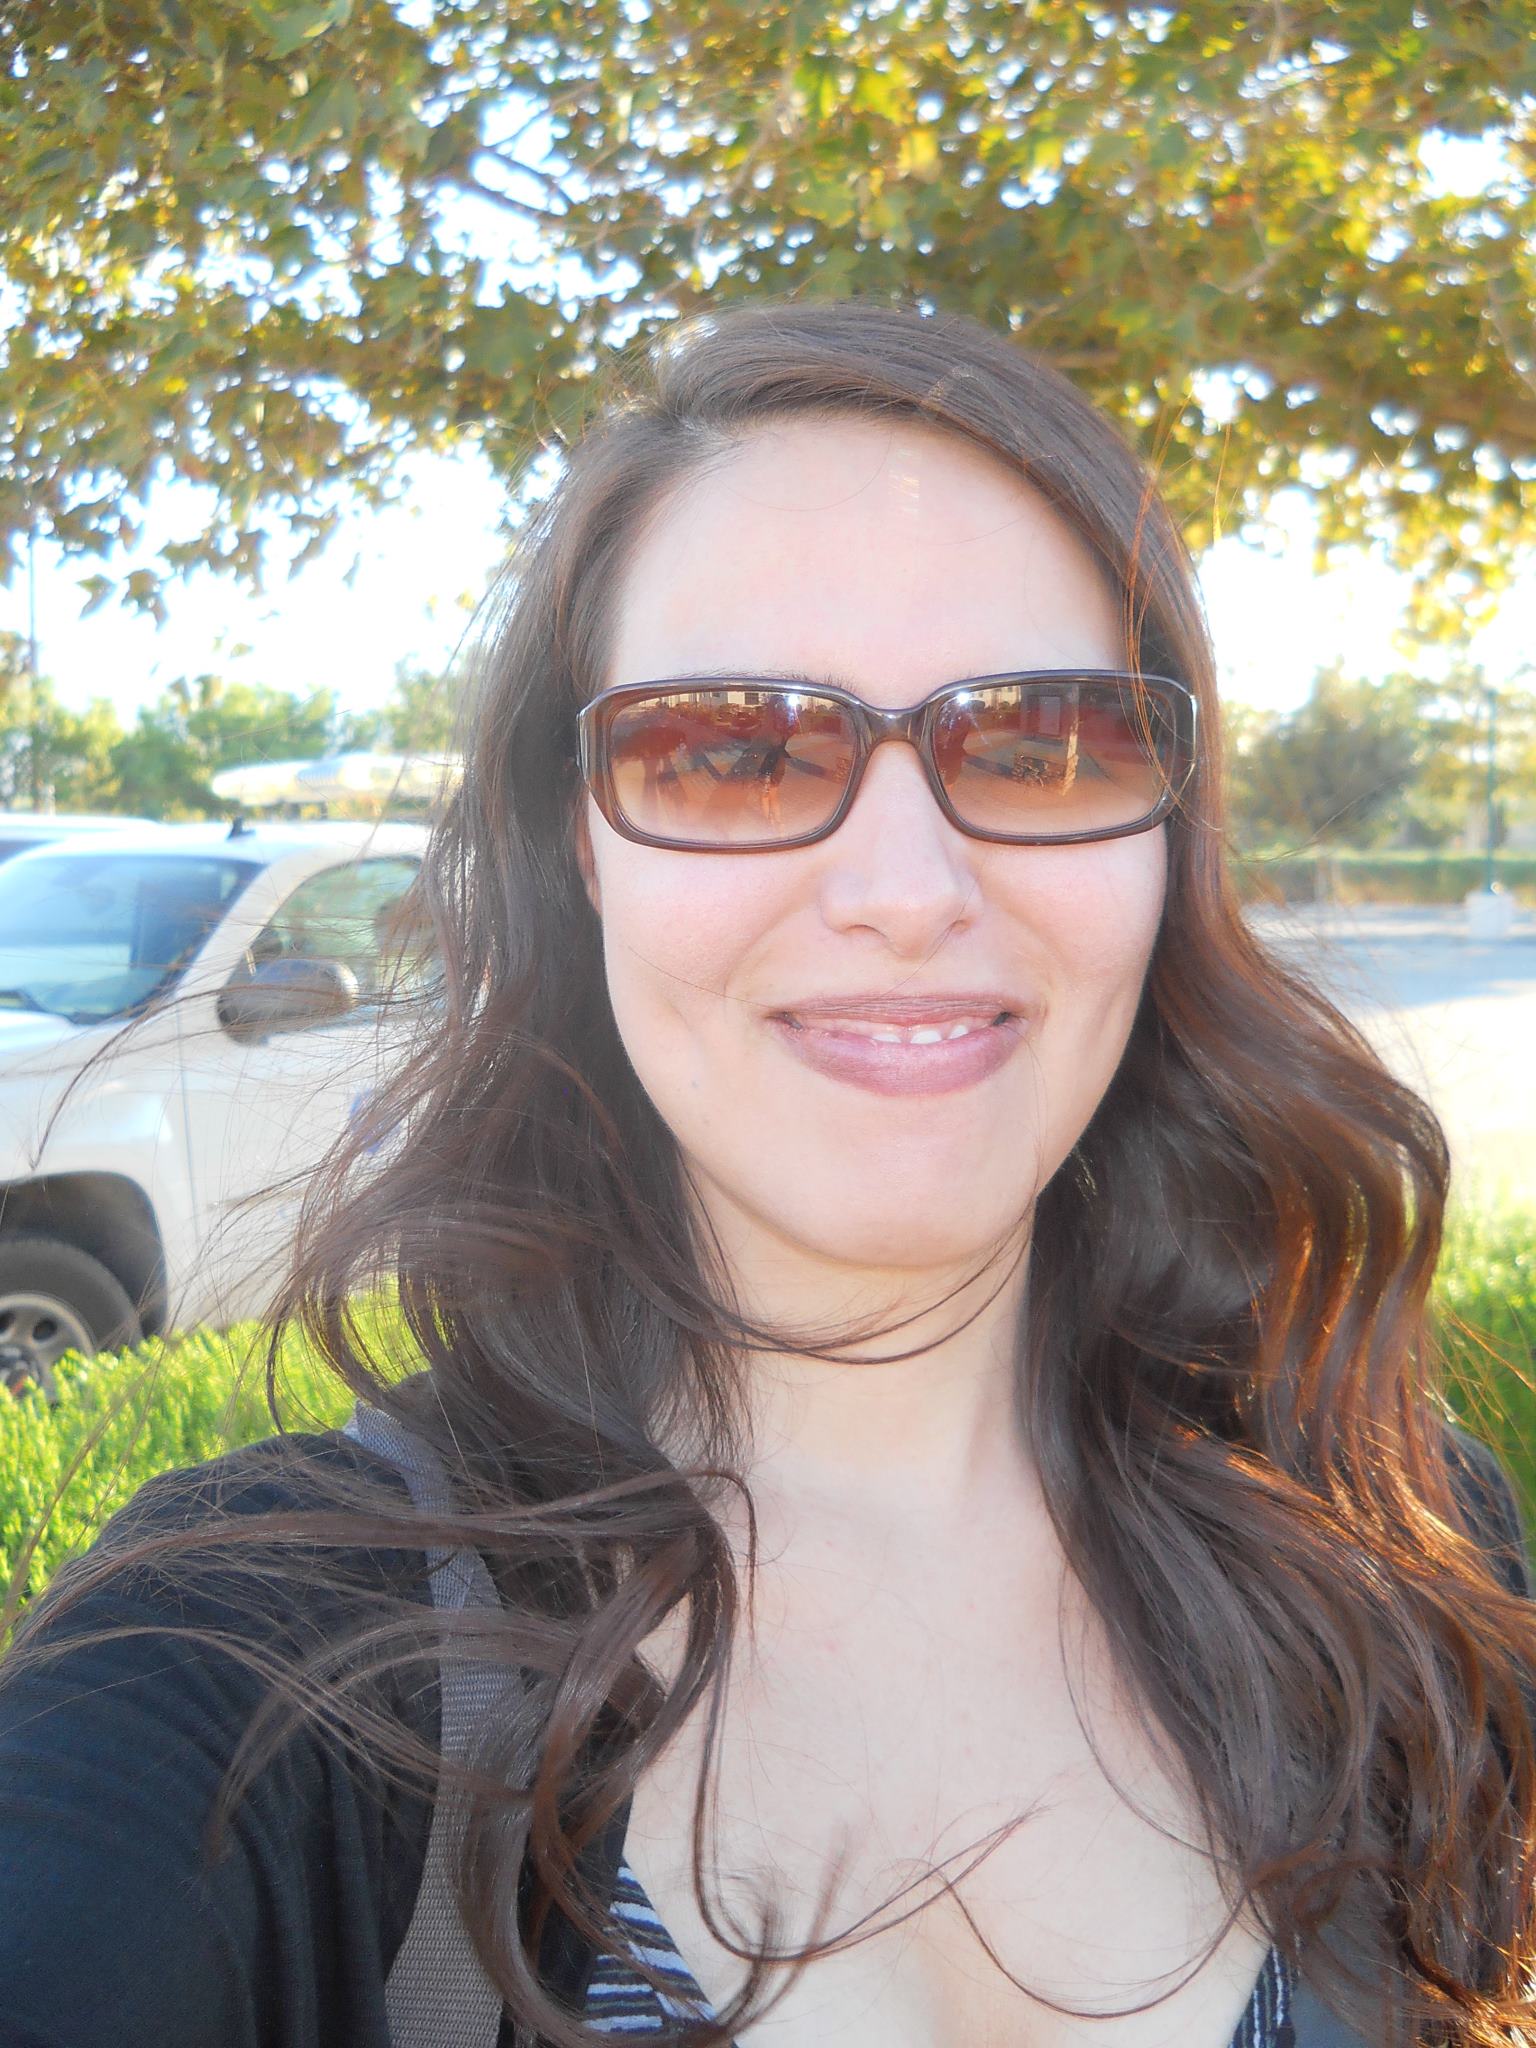 This is a photo of professor Guillen. She has long brown hair and is wearing sunglasses. She is outside on a sunny day.